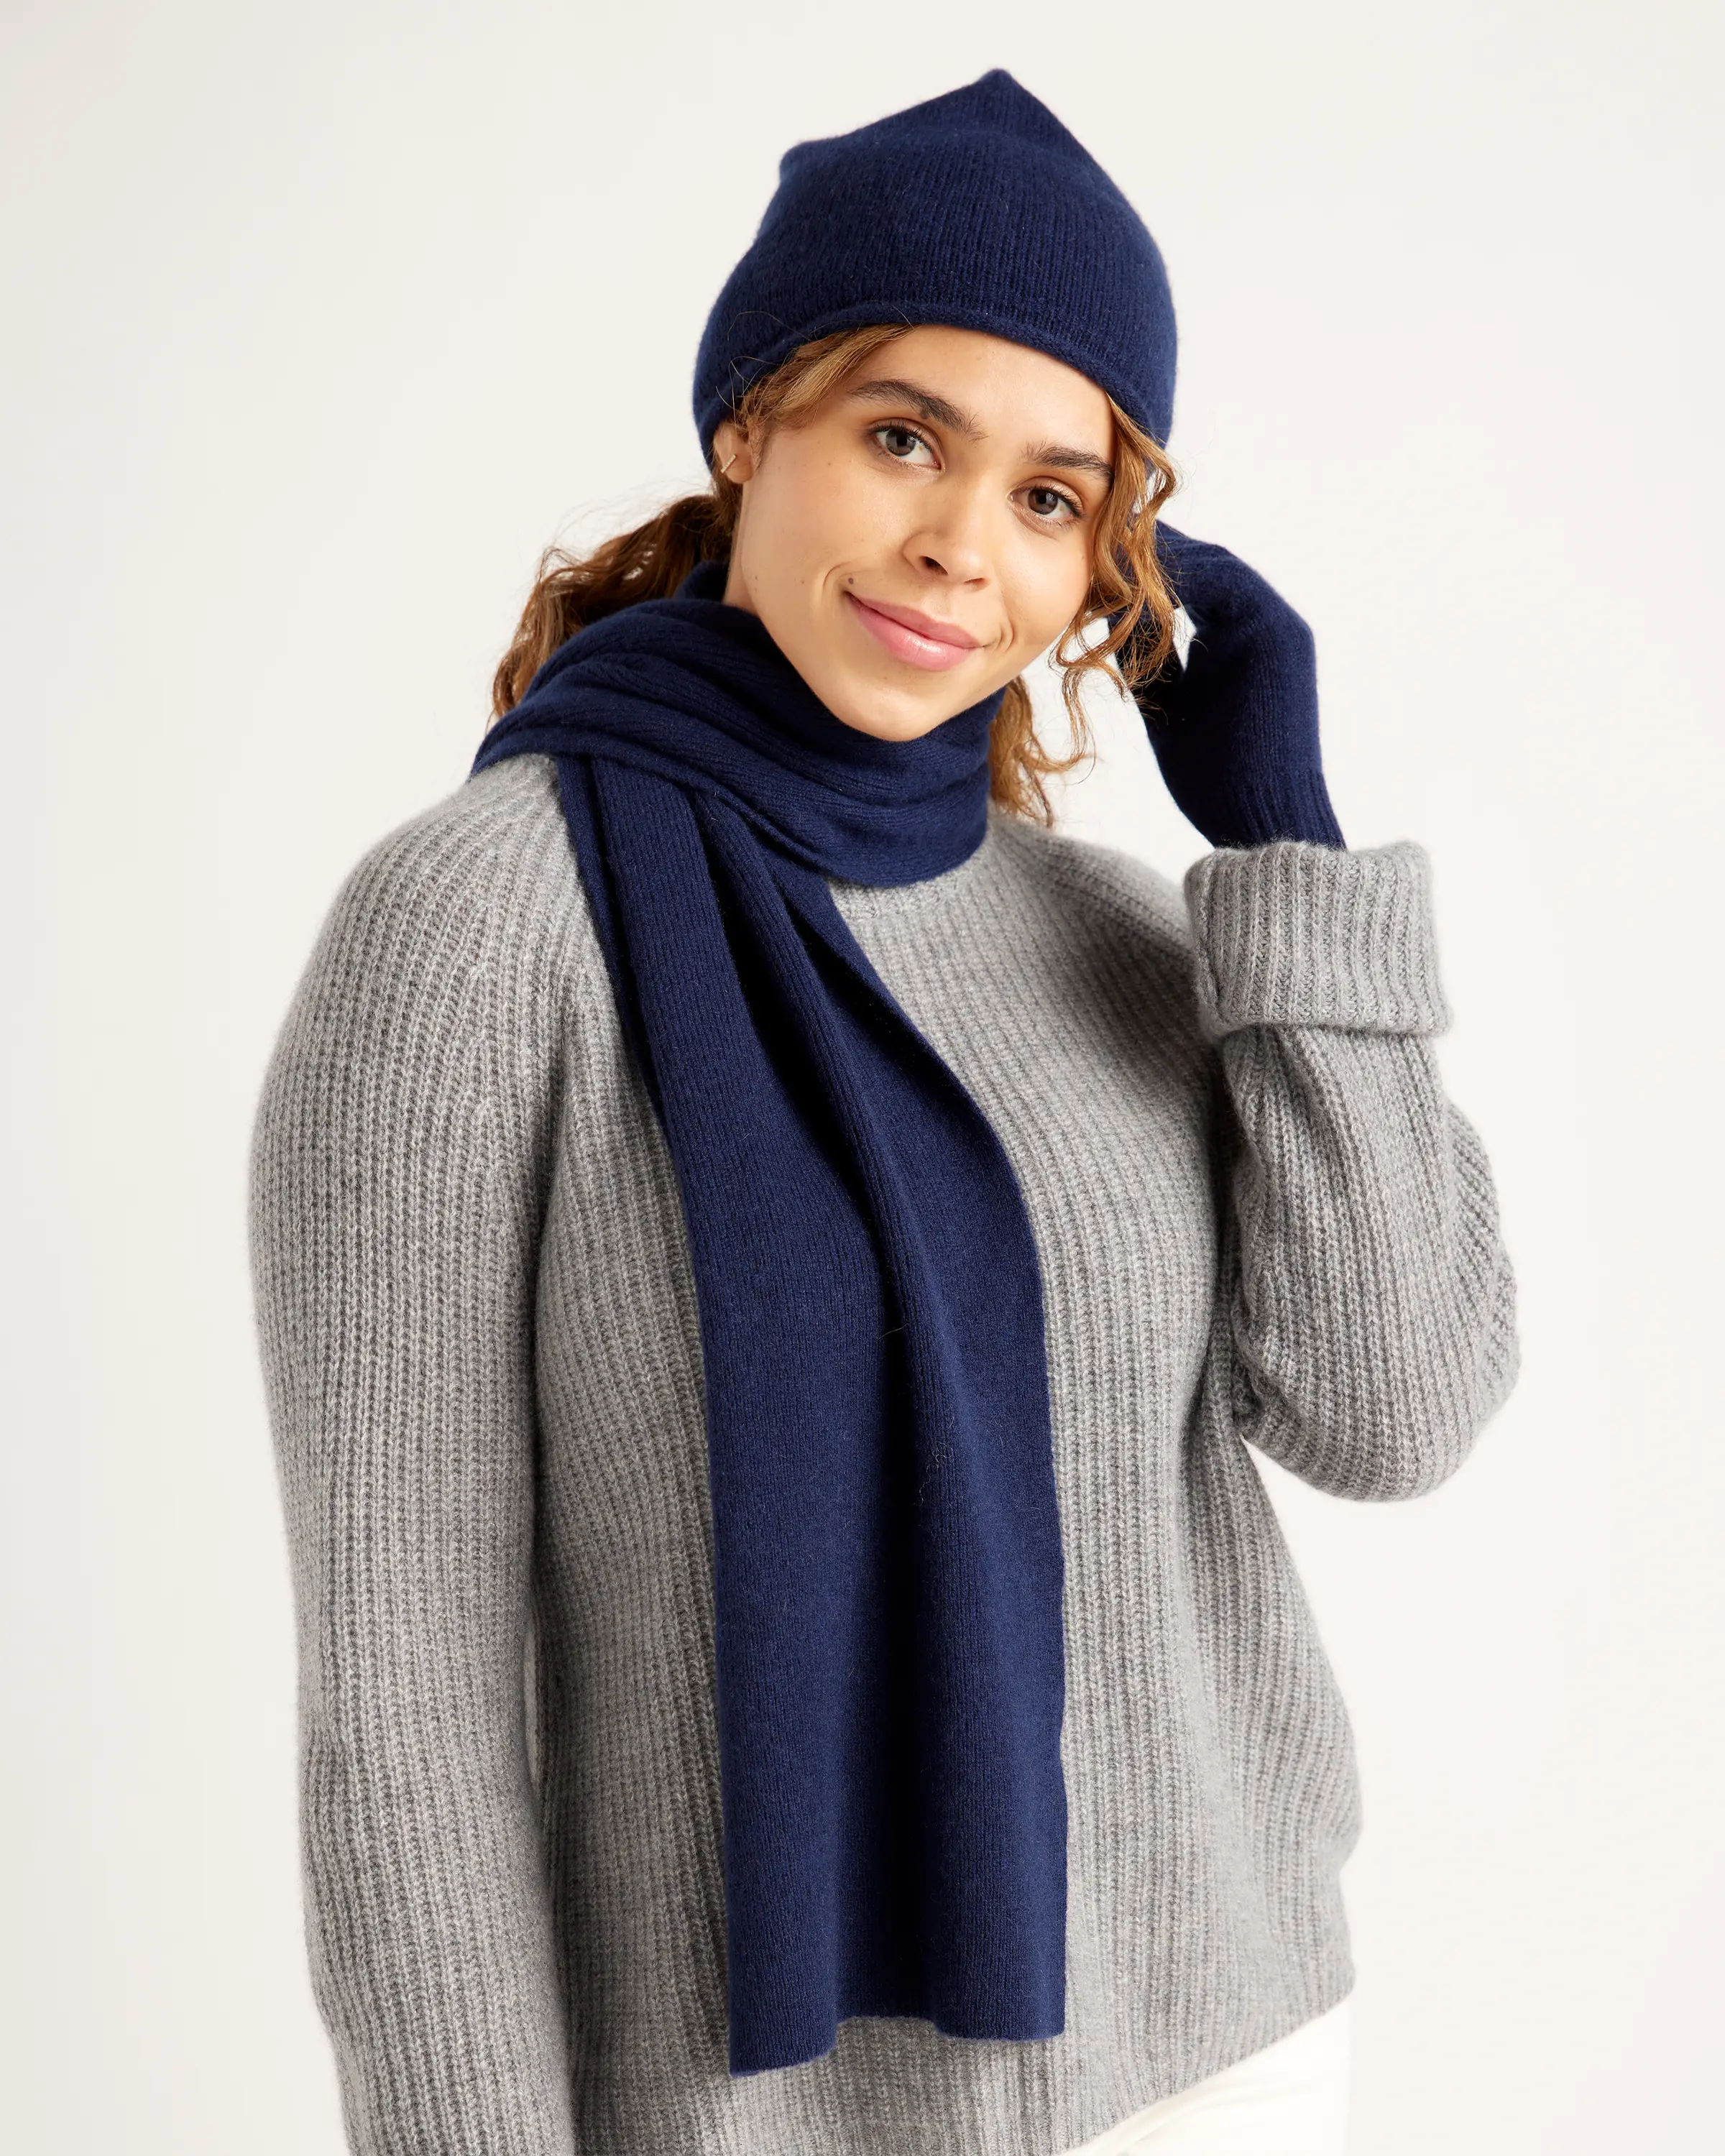 Person wearing a dark blue winter hat and scarf.